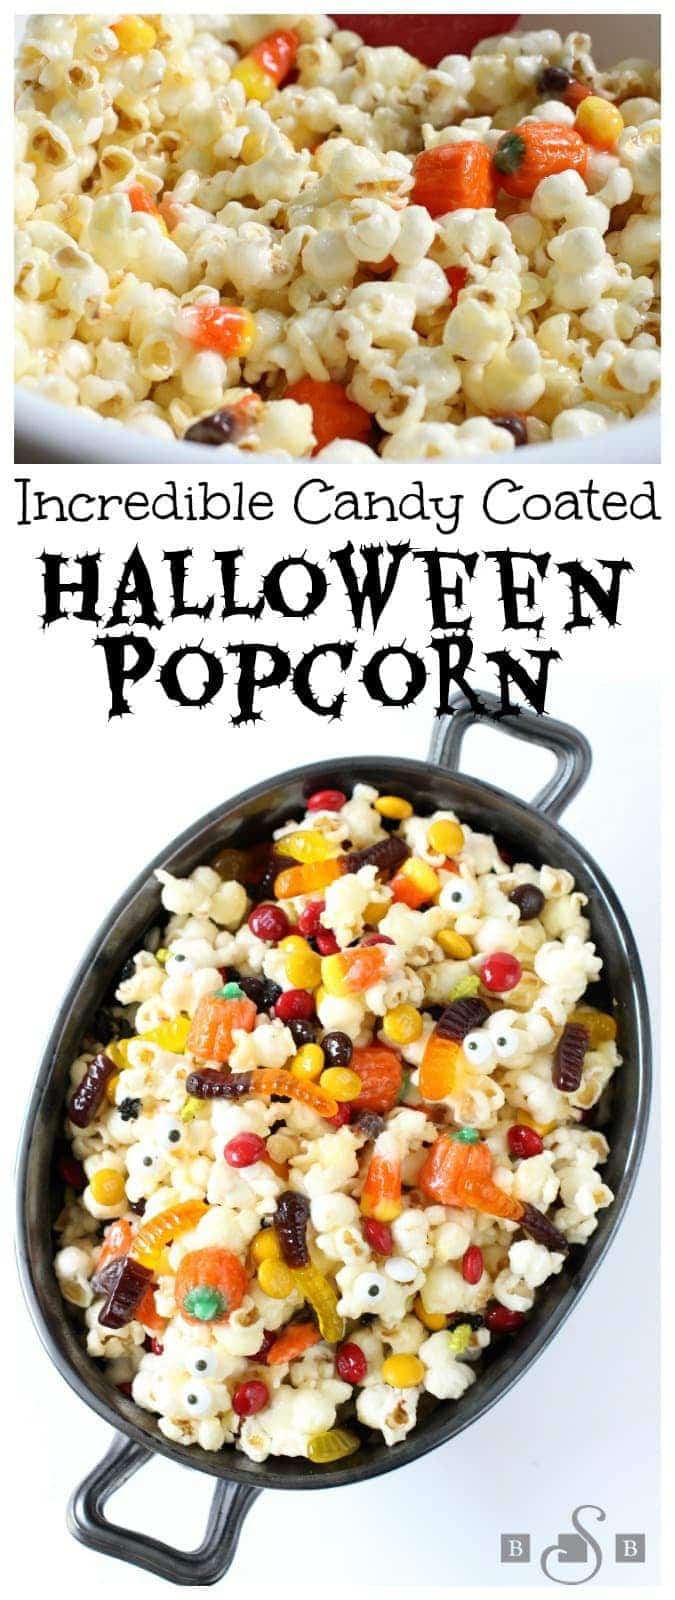 Halloween Popcorn made with a sweet, buttery candy coating then tossed with Halloween candy. It's the perfect festive treat! 